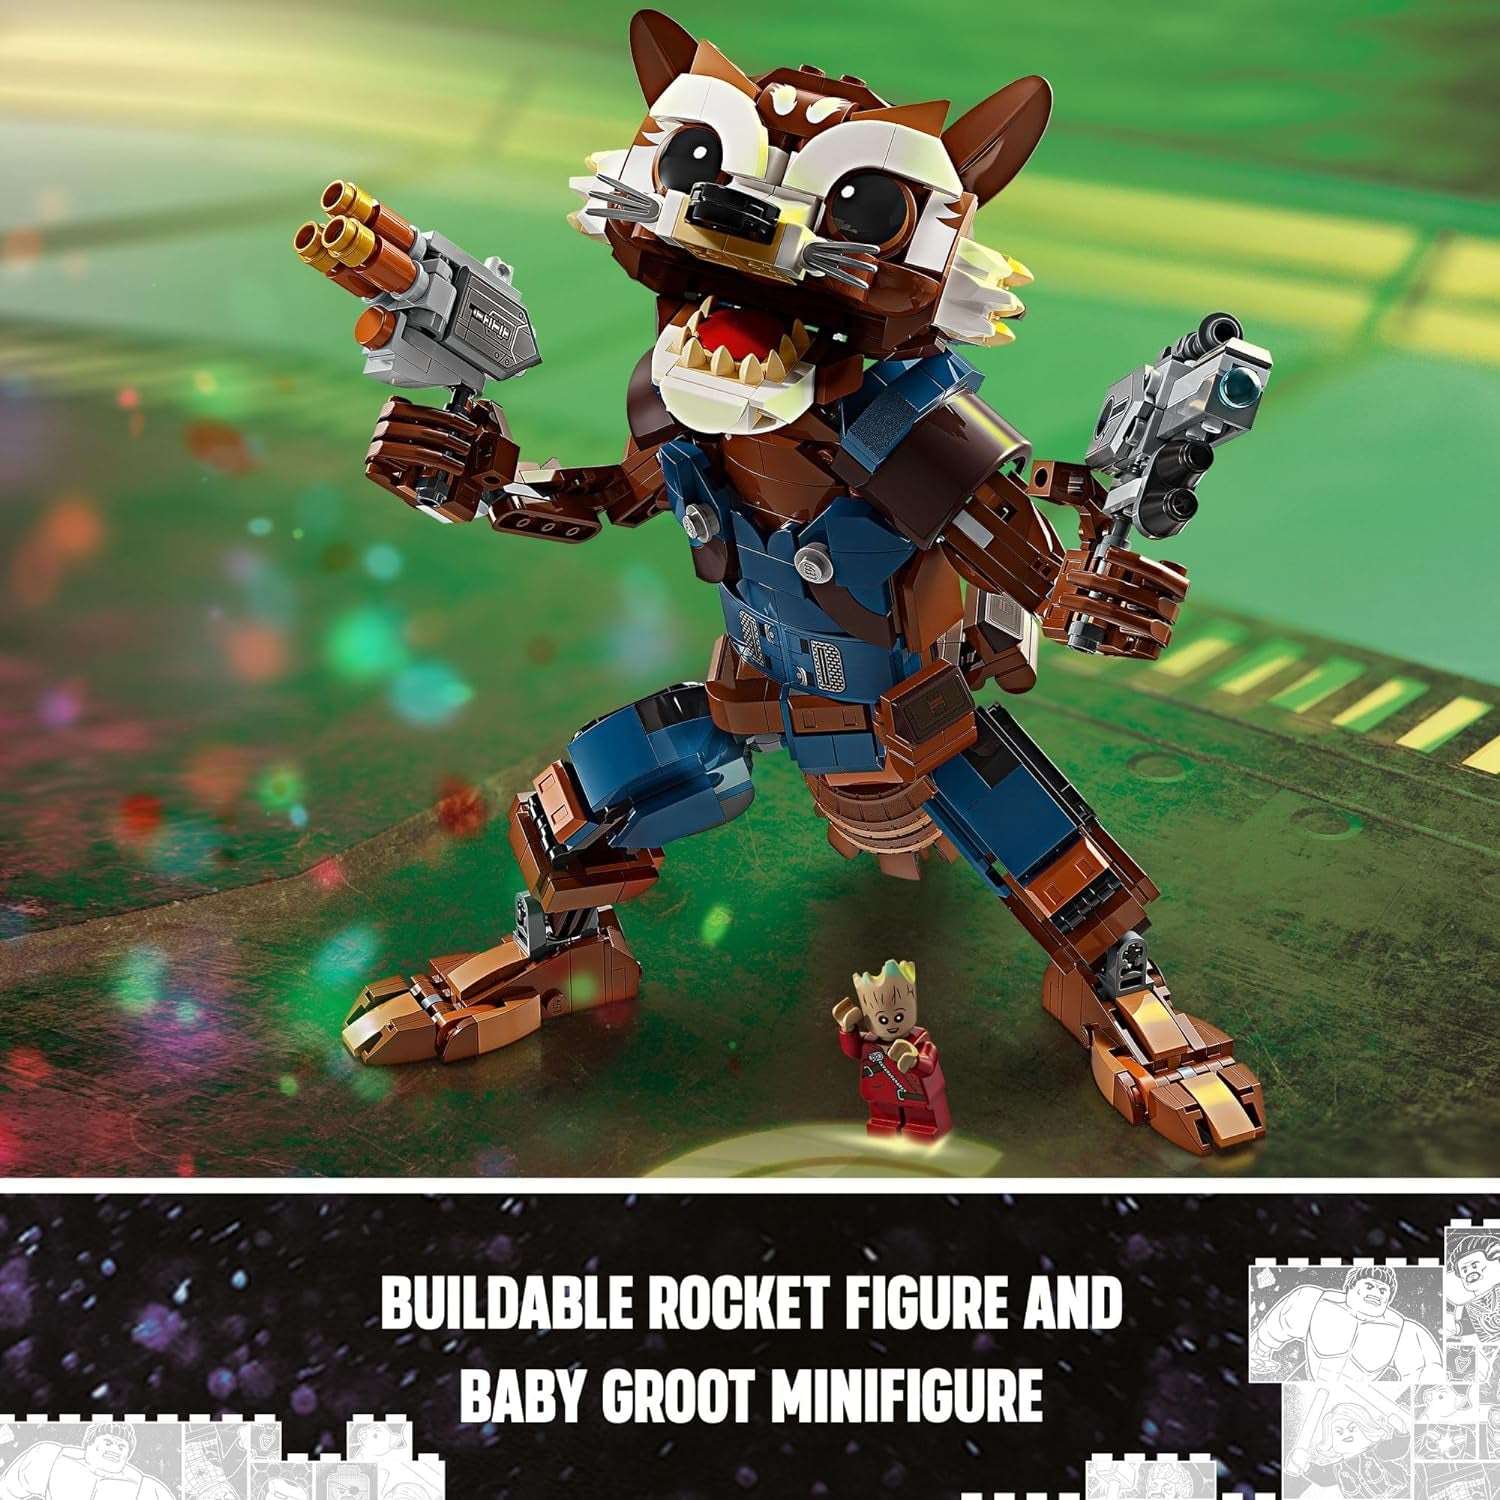 Marvel Rocket & Baby Groot Minifigure, Guardians of the Galaxy Inspired Marvel Toy for Kids, Buildable Marvel Action Figure for Play and Display, Gift for Boys and Girls Ages 10 and Up, 76282